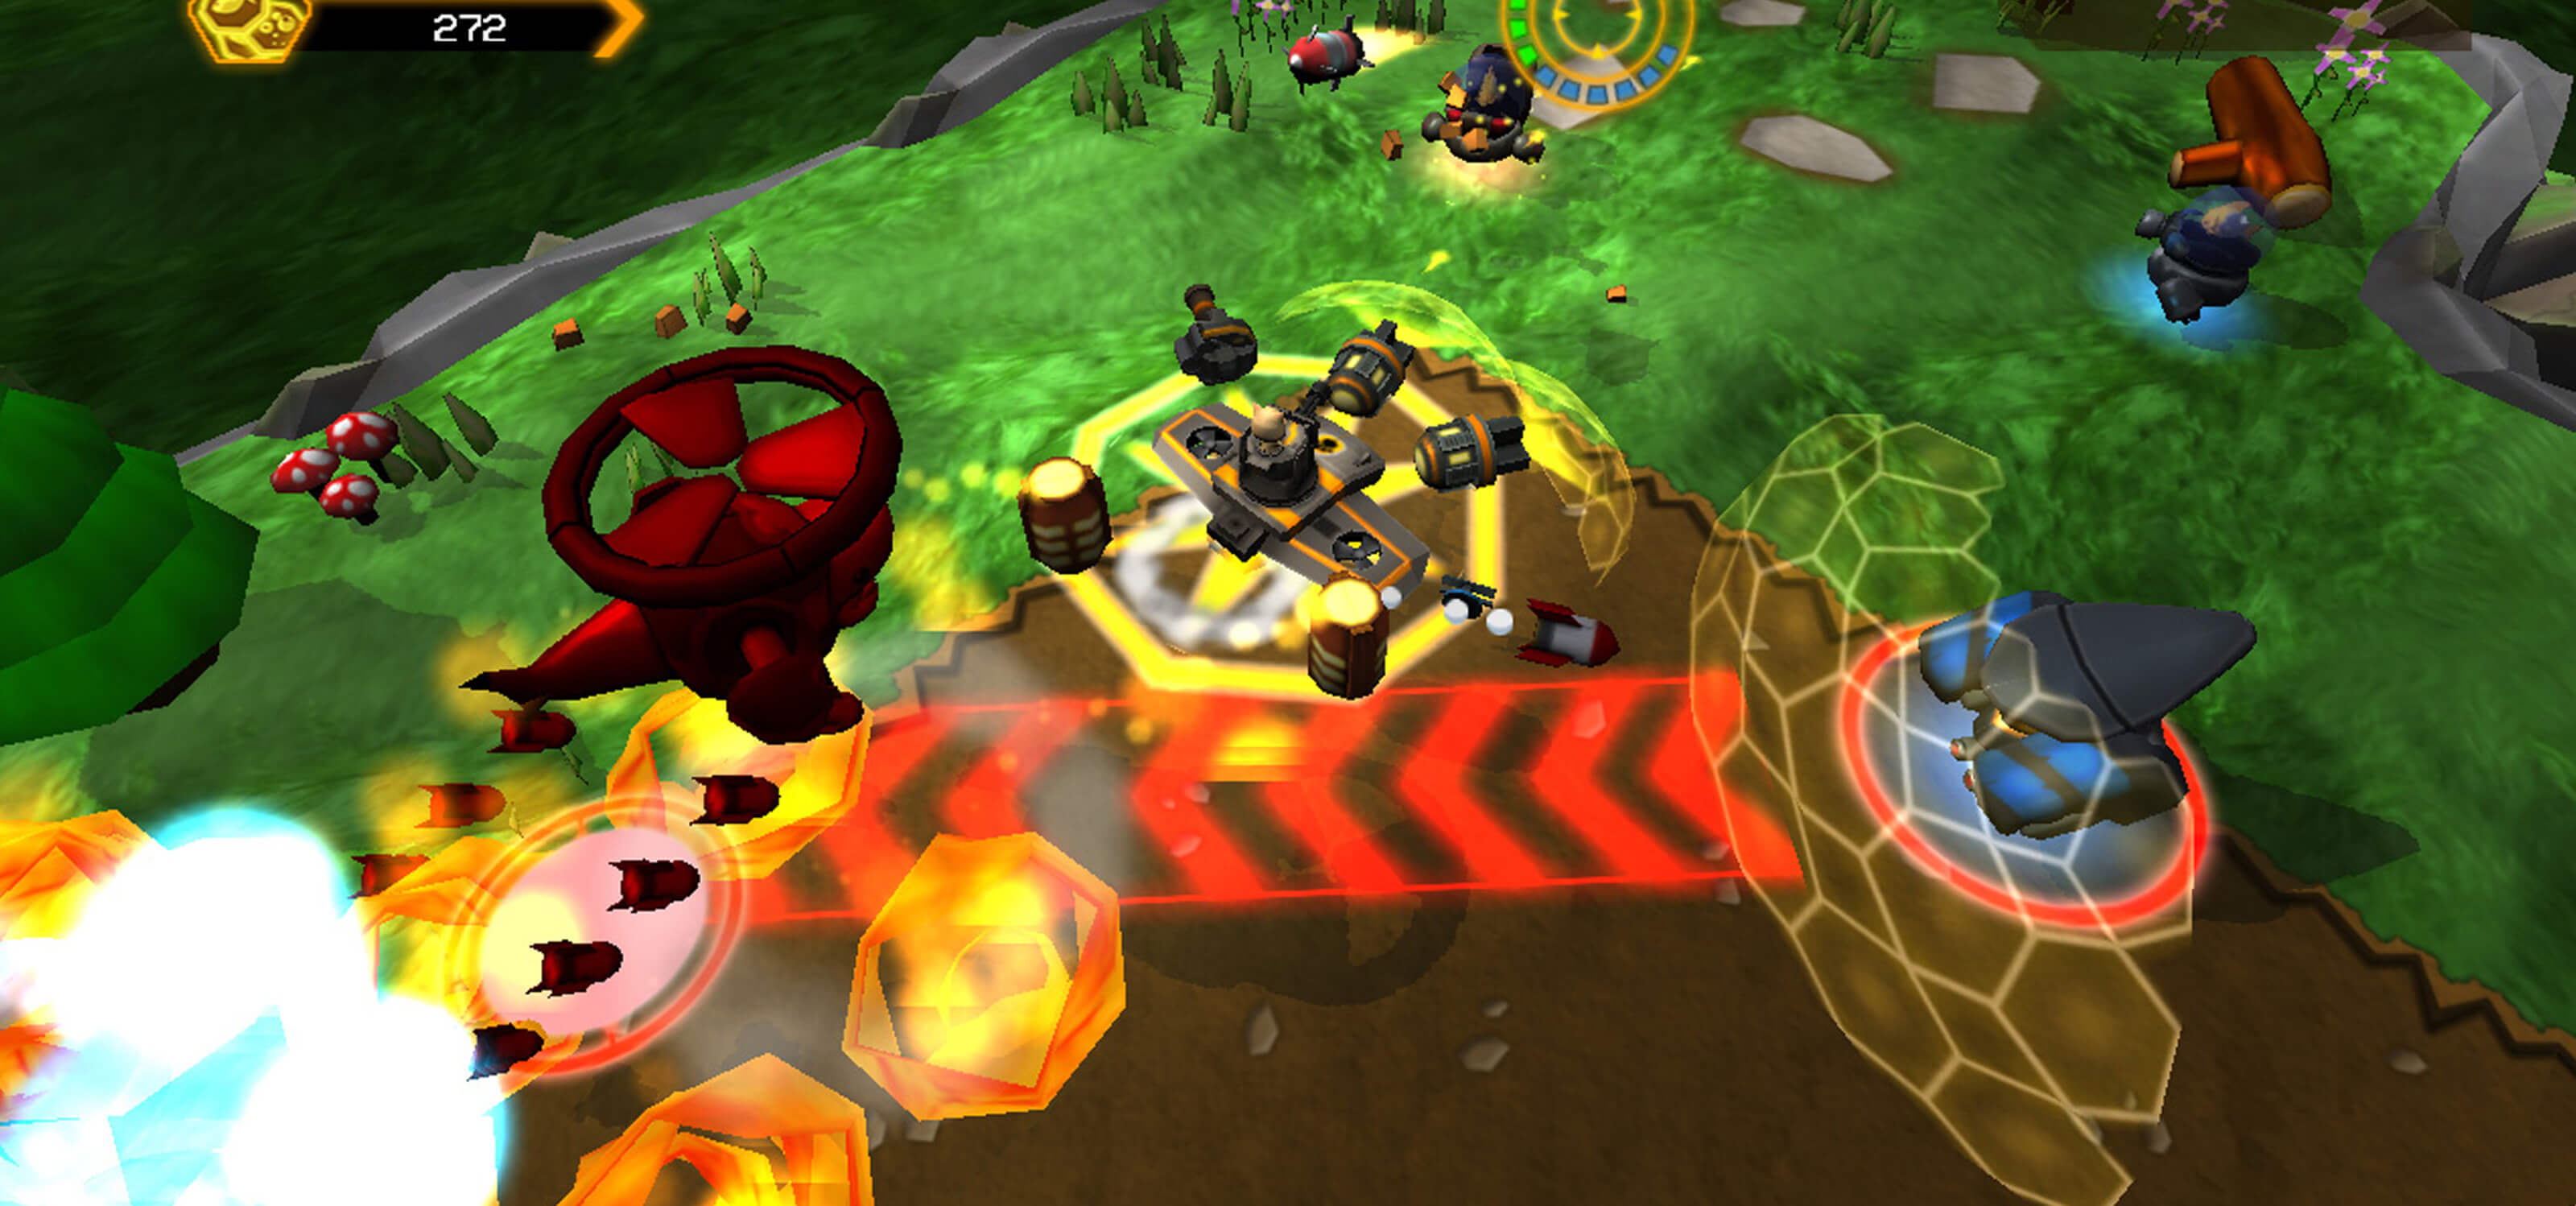 Screenshot of player's cat-piloted hover tank surrounded by enemies and dodging explosions and bombs